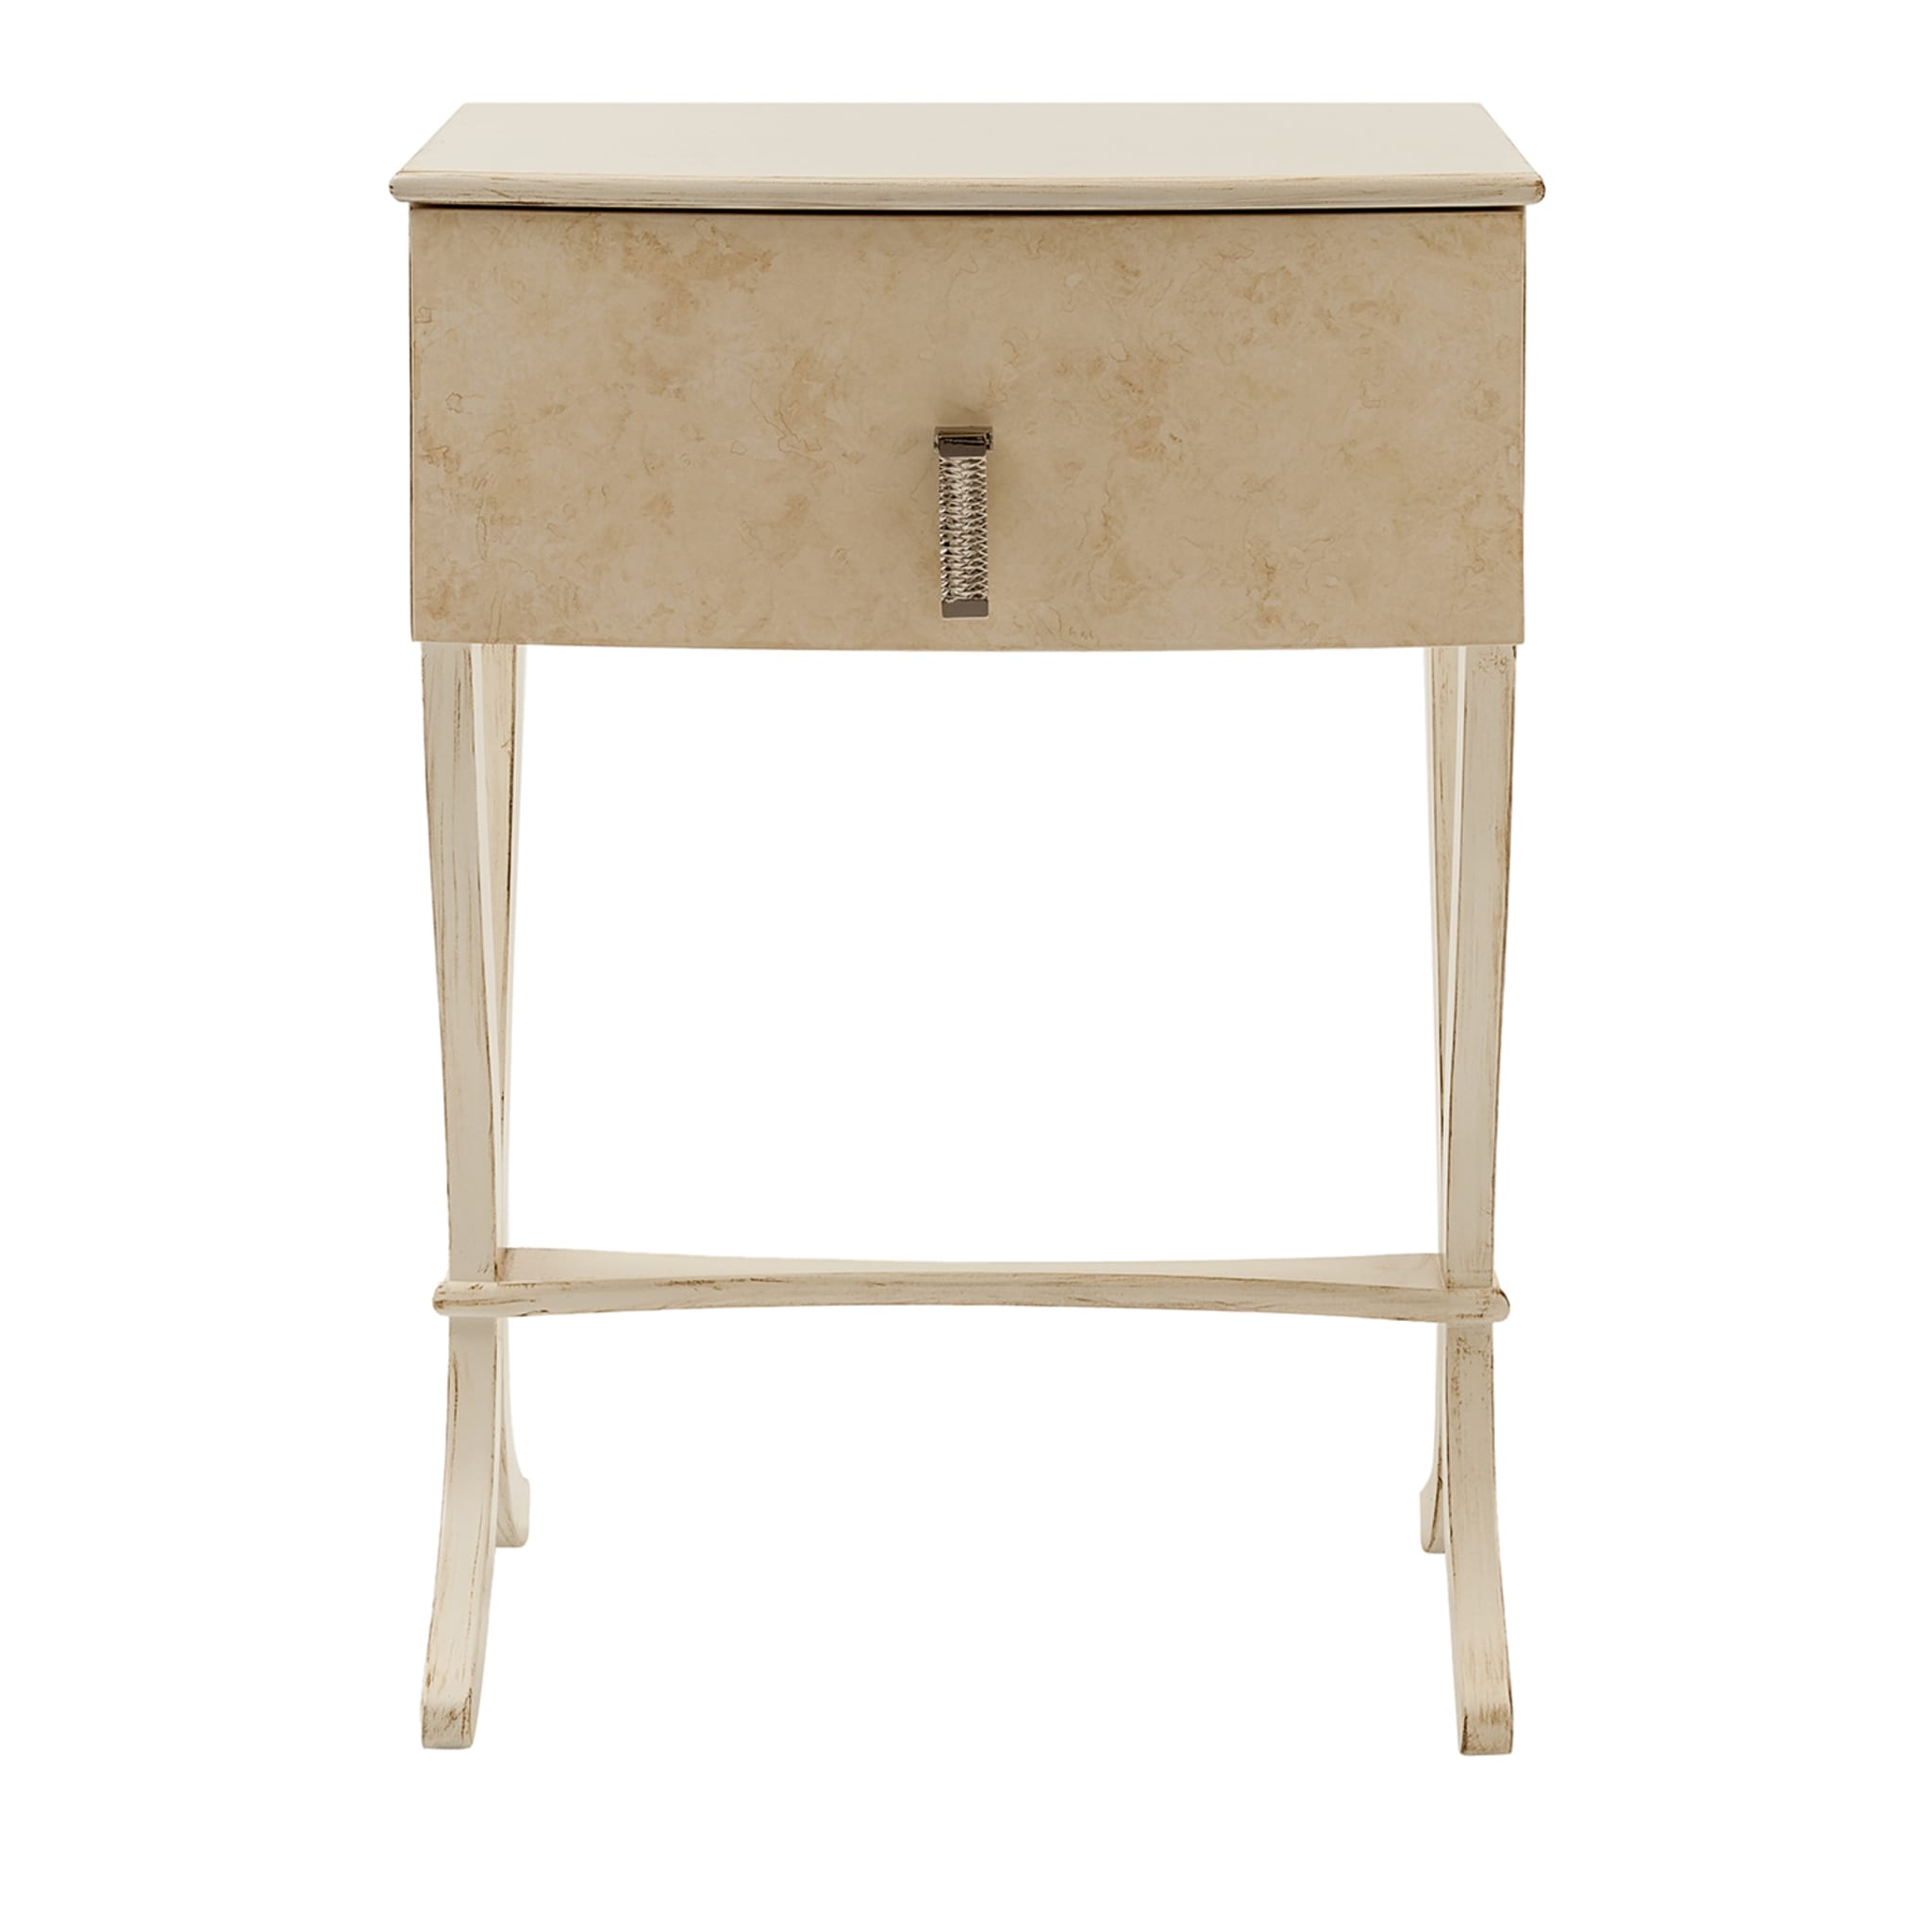 Novecento Marble-Effect Cream-Toned Nightstand - Main view